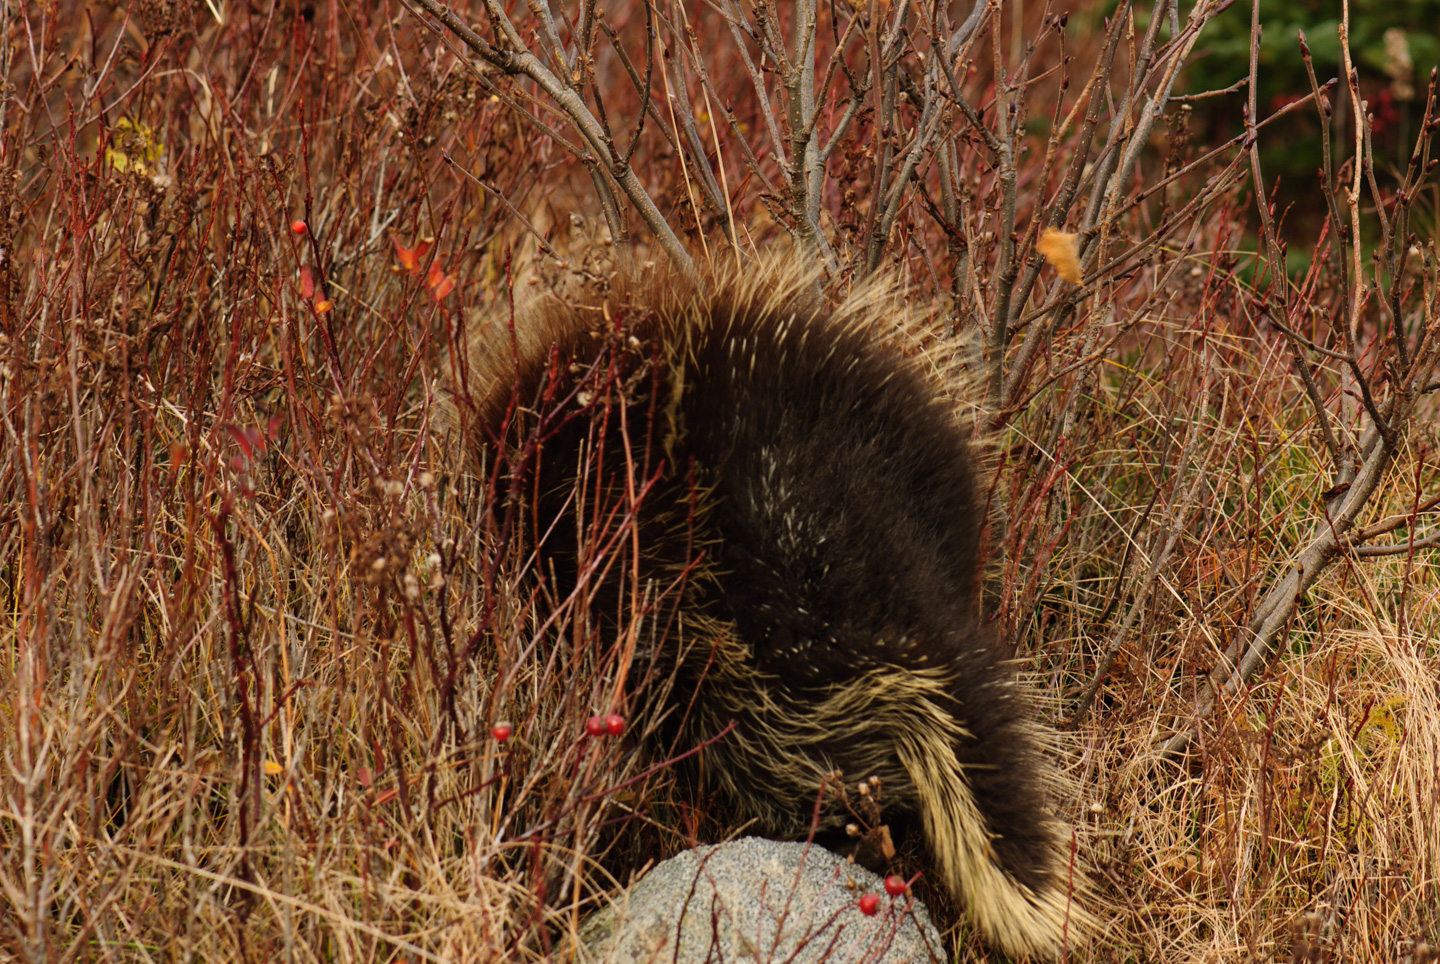 A porcupine making a quick exciting